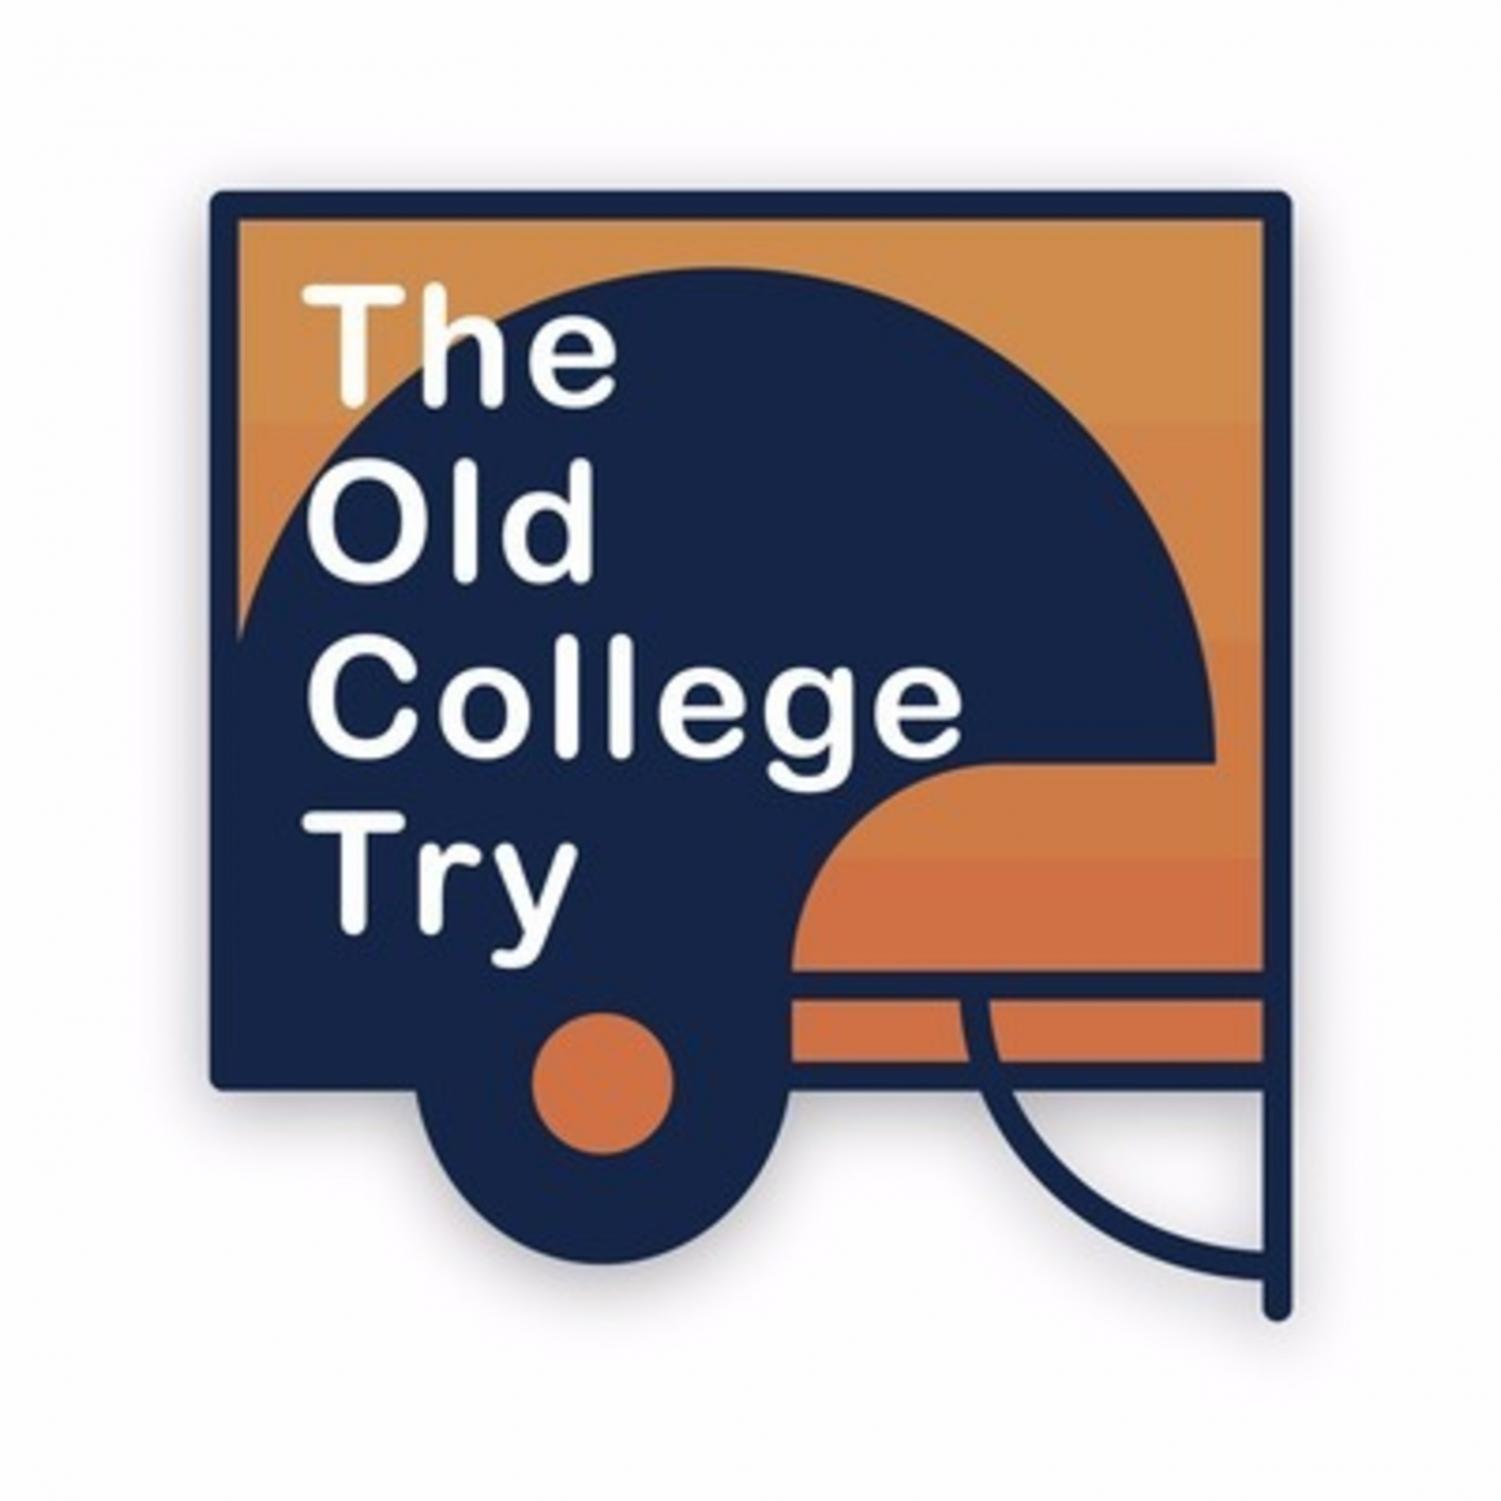 ‘Old college try’ isn’t being used properly The Hawkeye